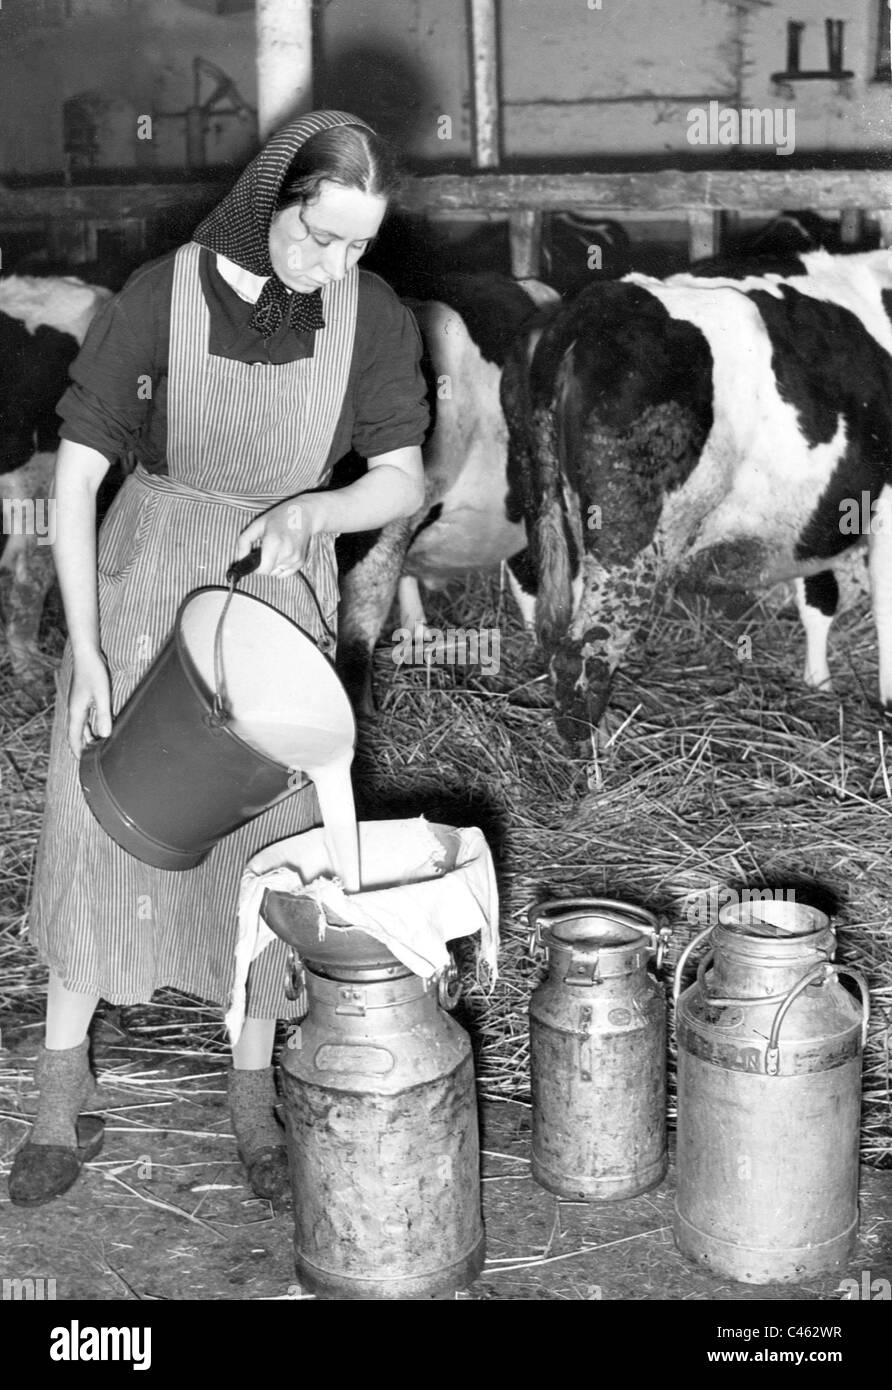 Farmer during the pouring of milk, 1941 Stock Photo